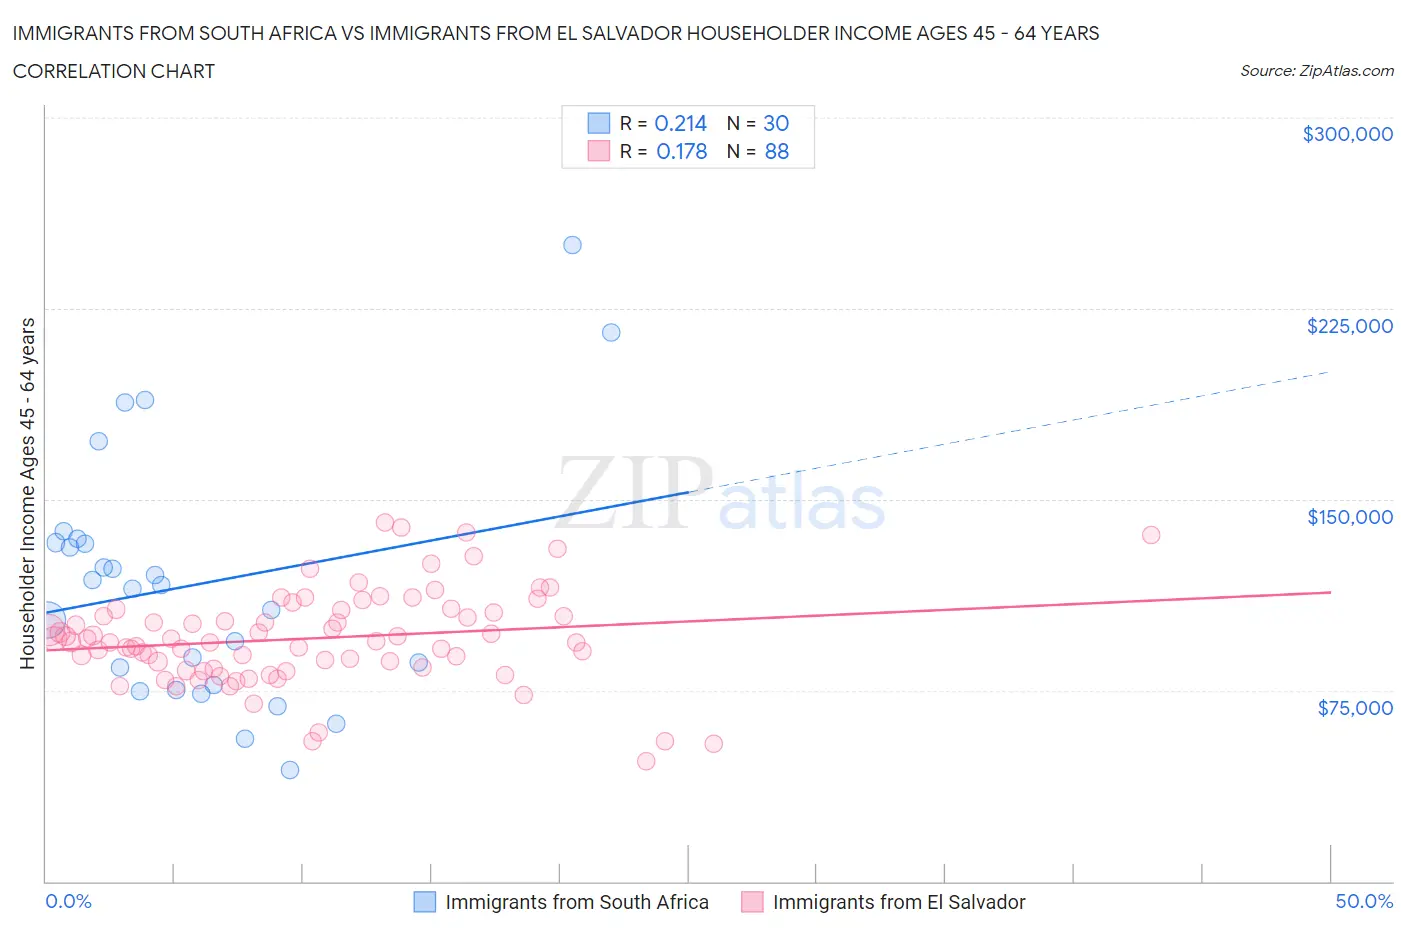 Immigrants from South Africa vs Immigrants from El Salvador Householder Income Ages 45 - 64 years